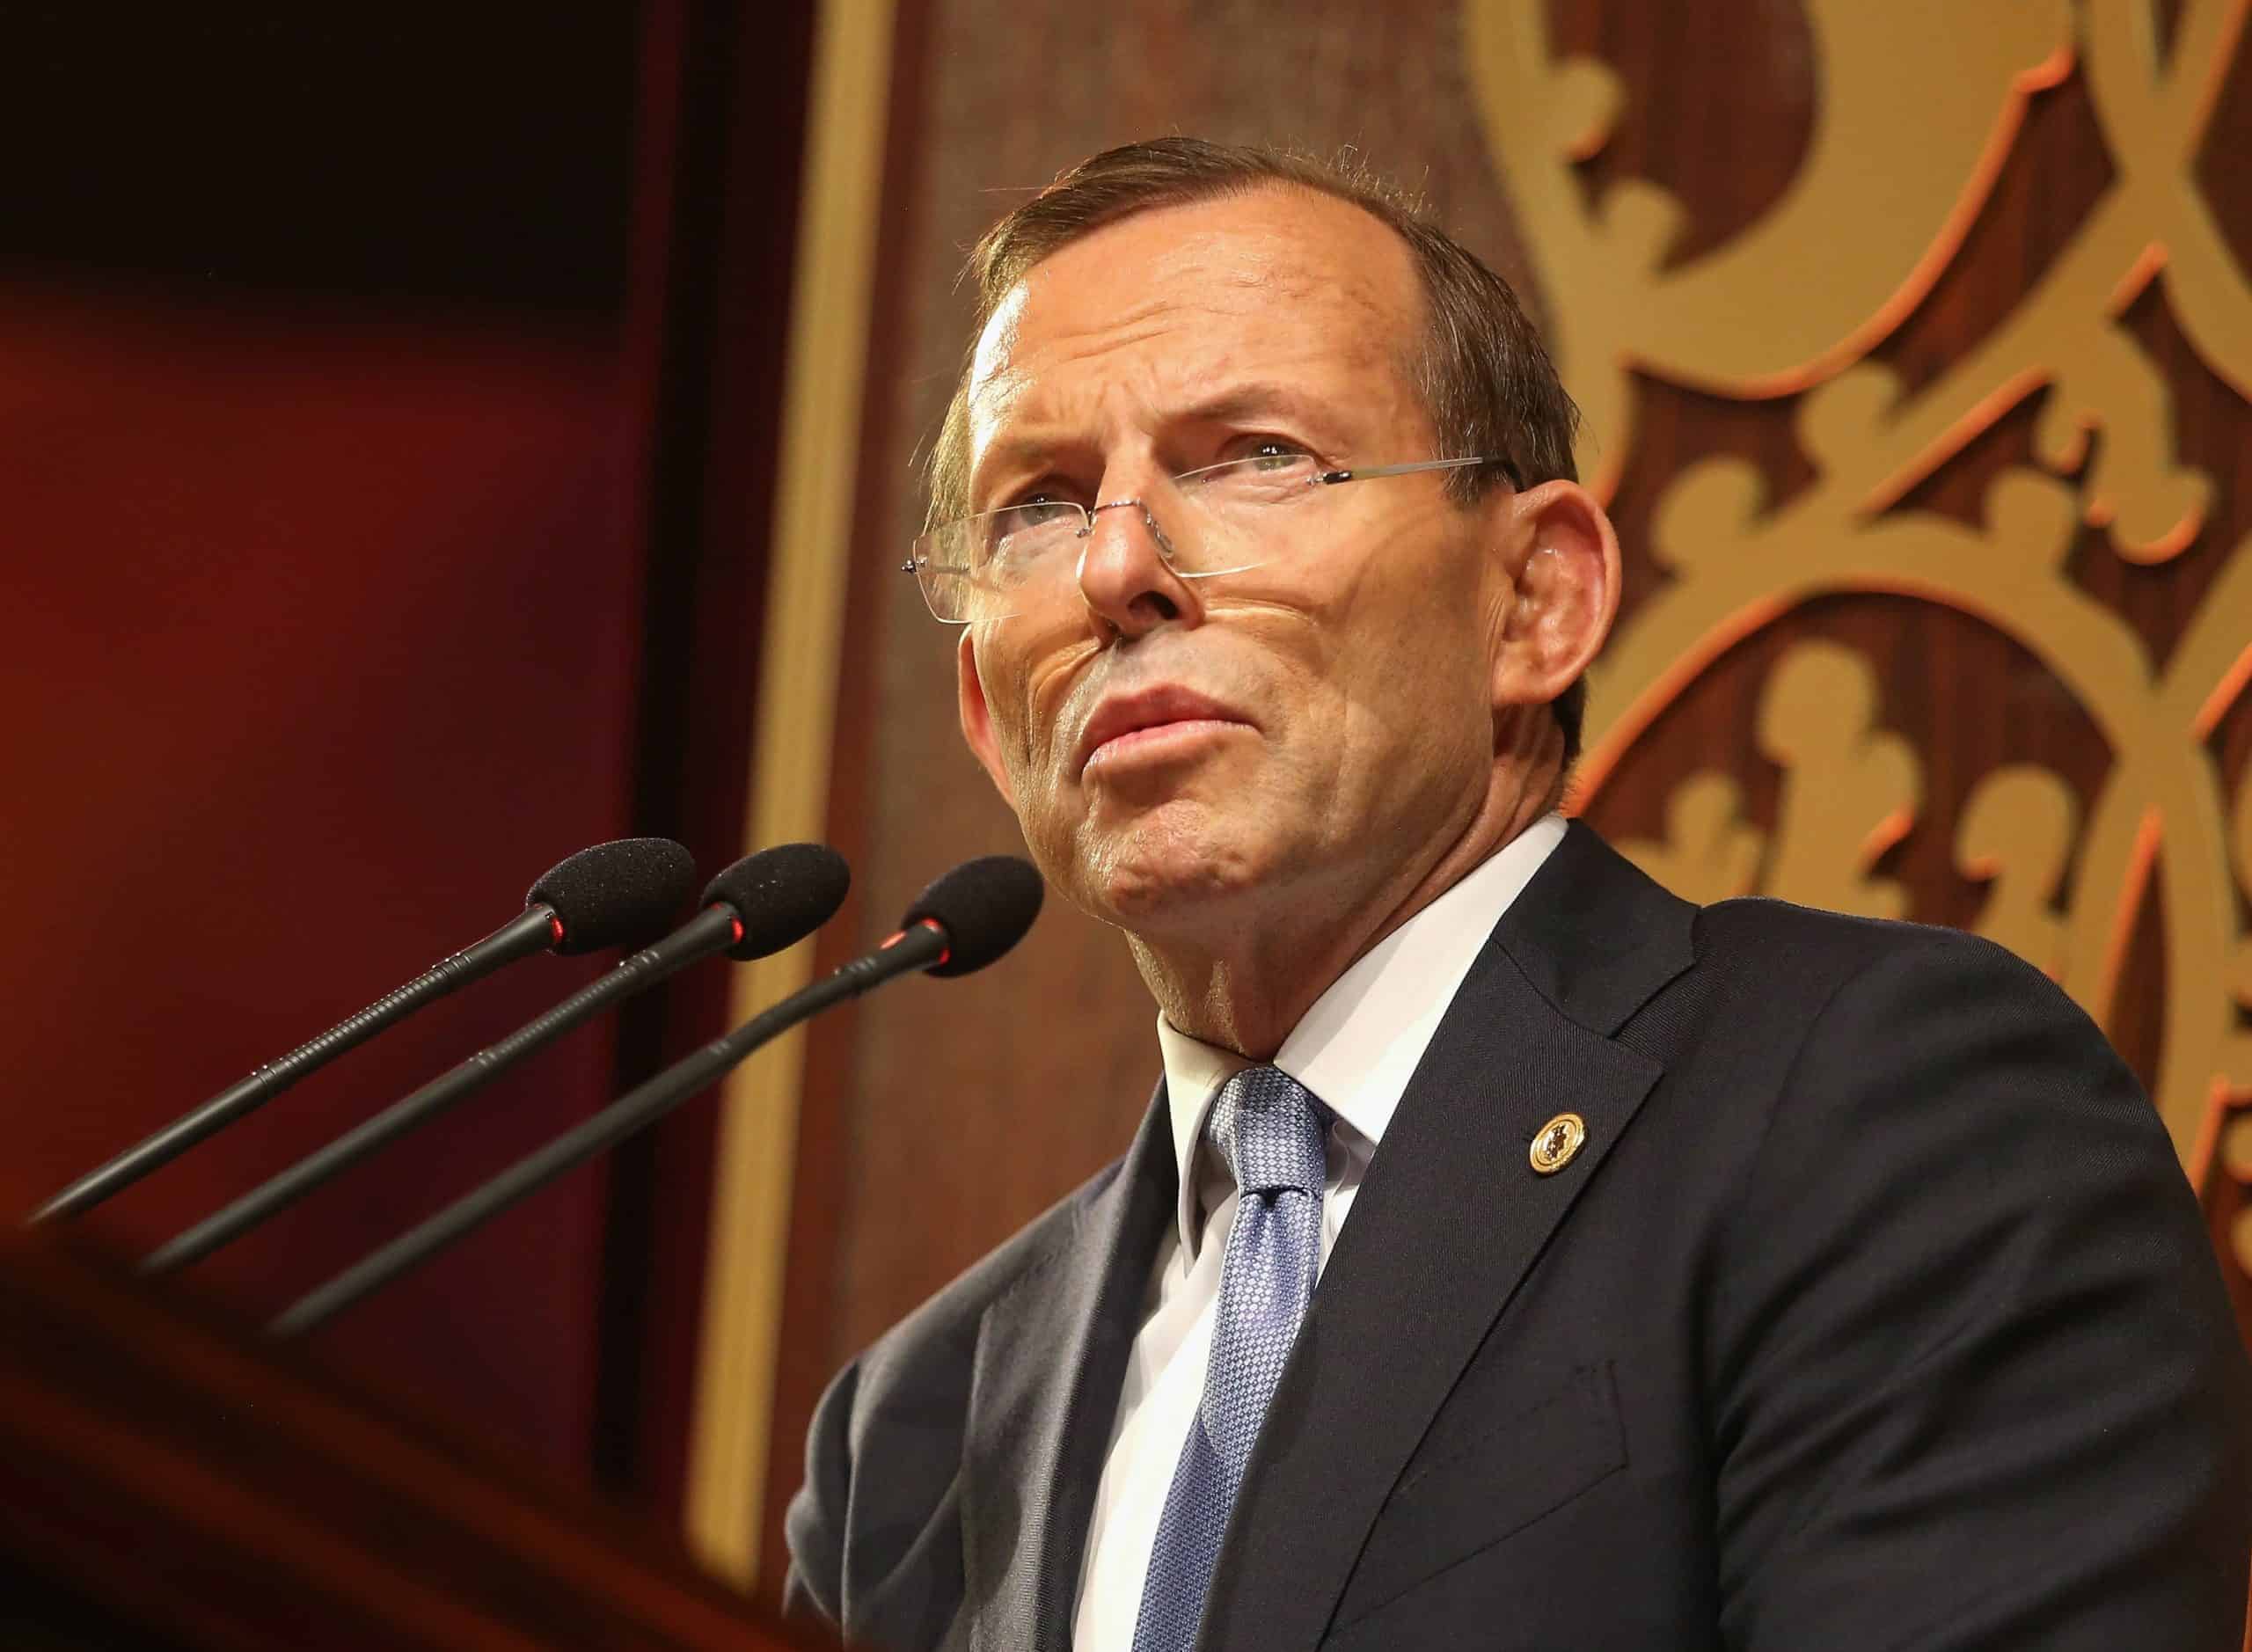 Abbott trade job sparks conflict of interest claims in Australia